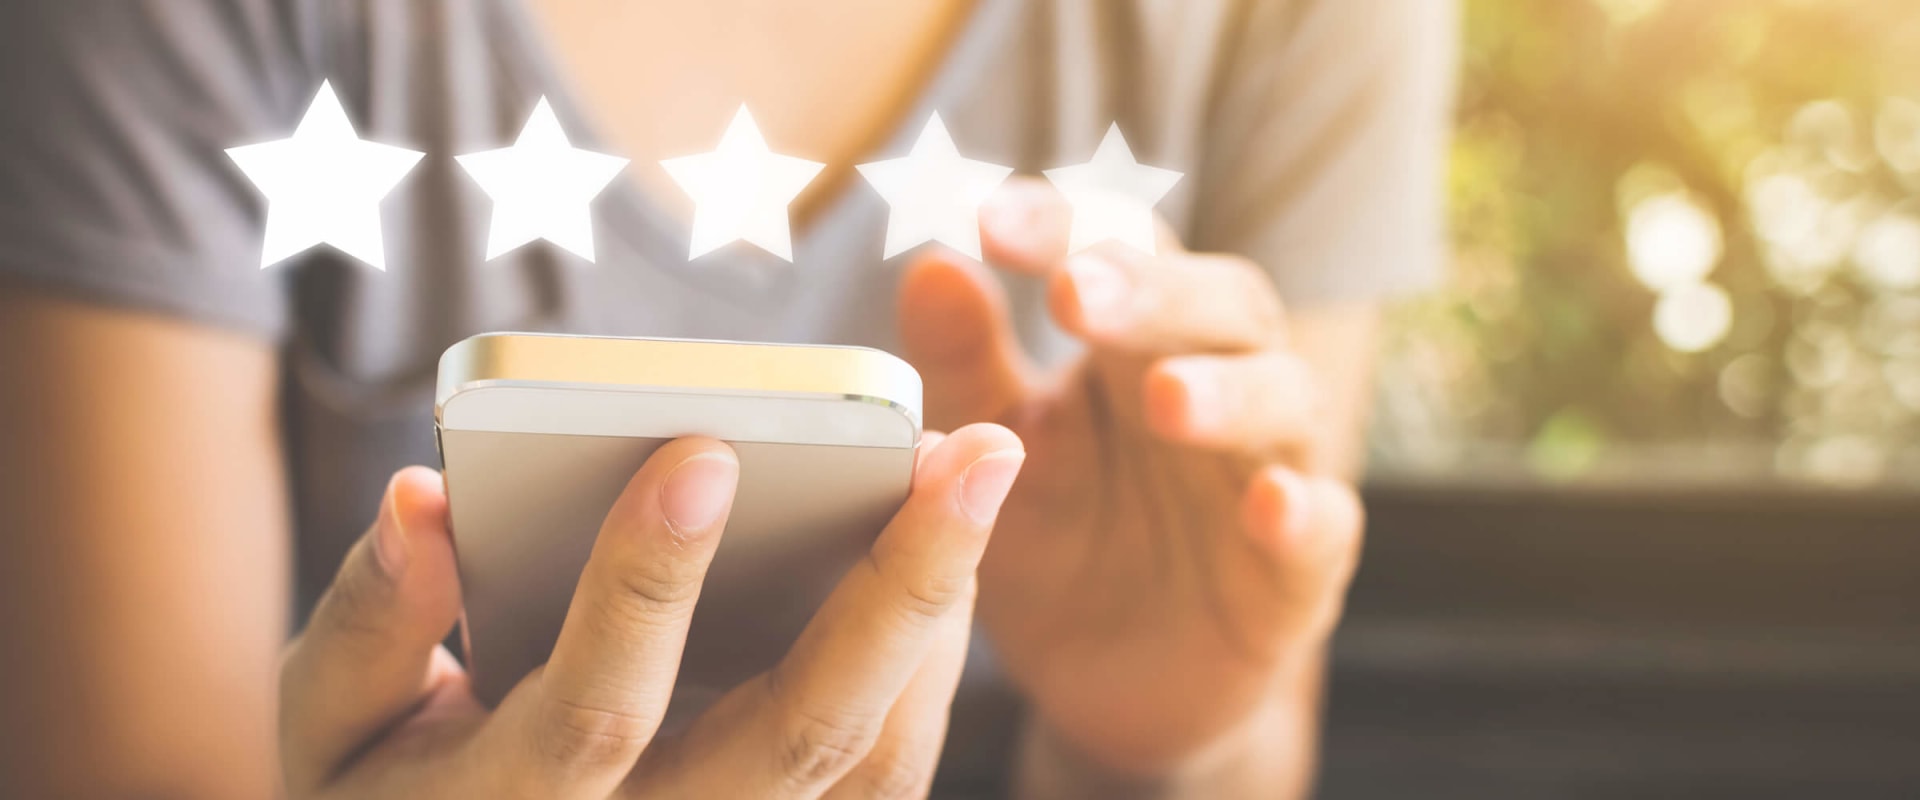 Product Reviews and Ratings: What to Look Out for